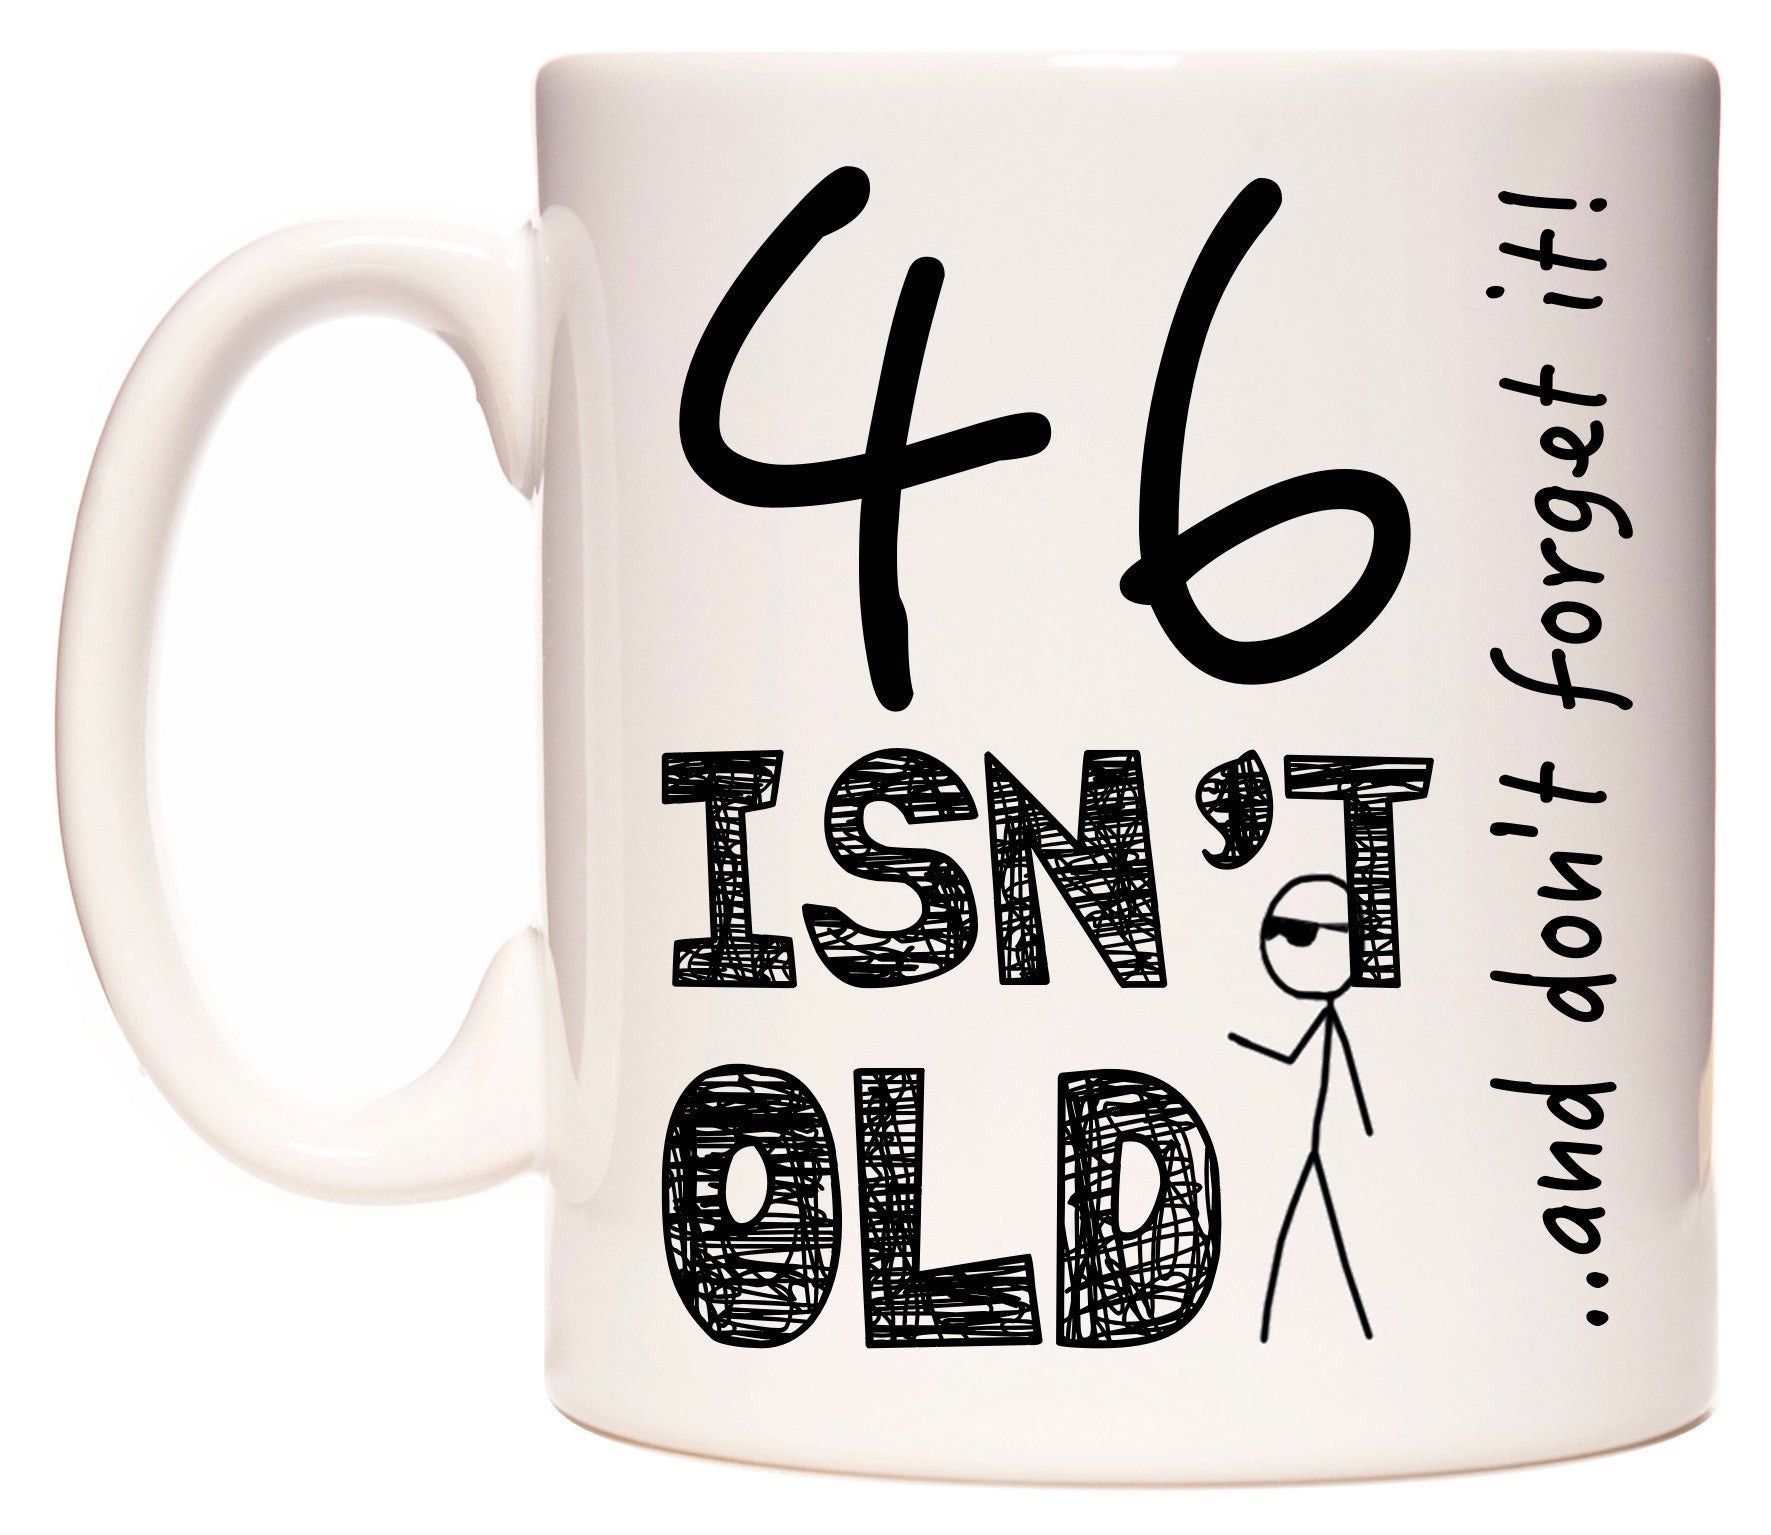 This mug features 46 Isn't Old